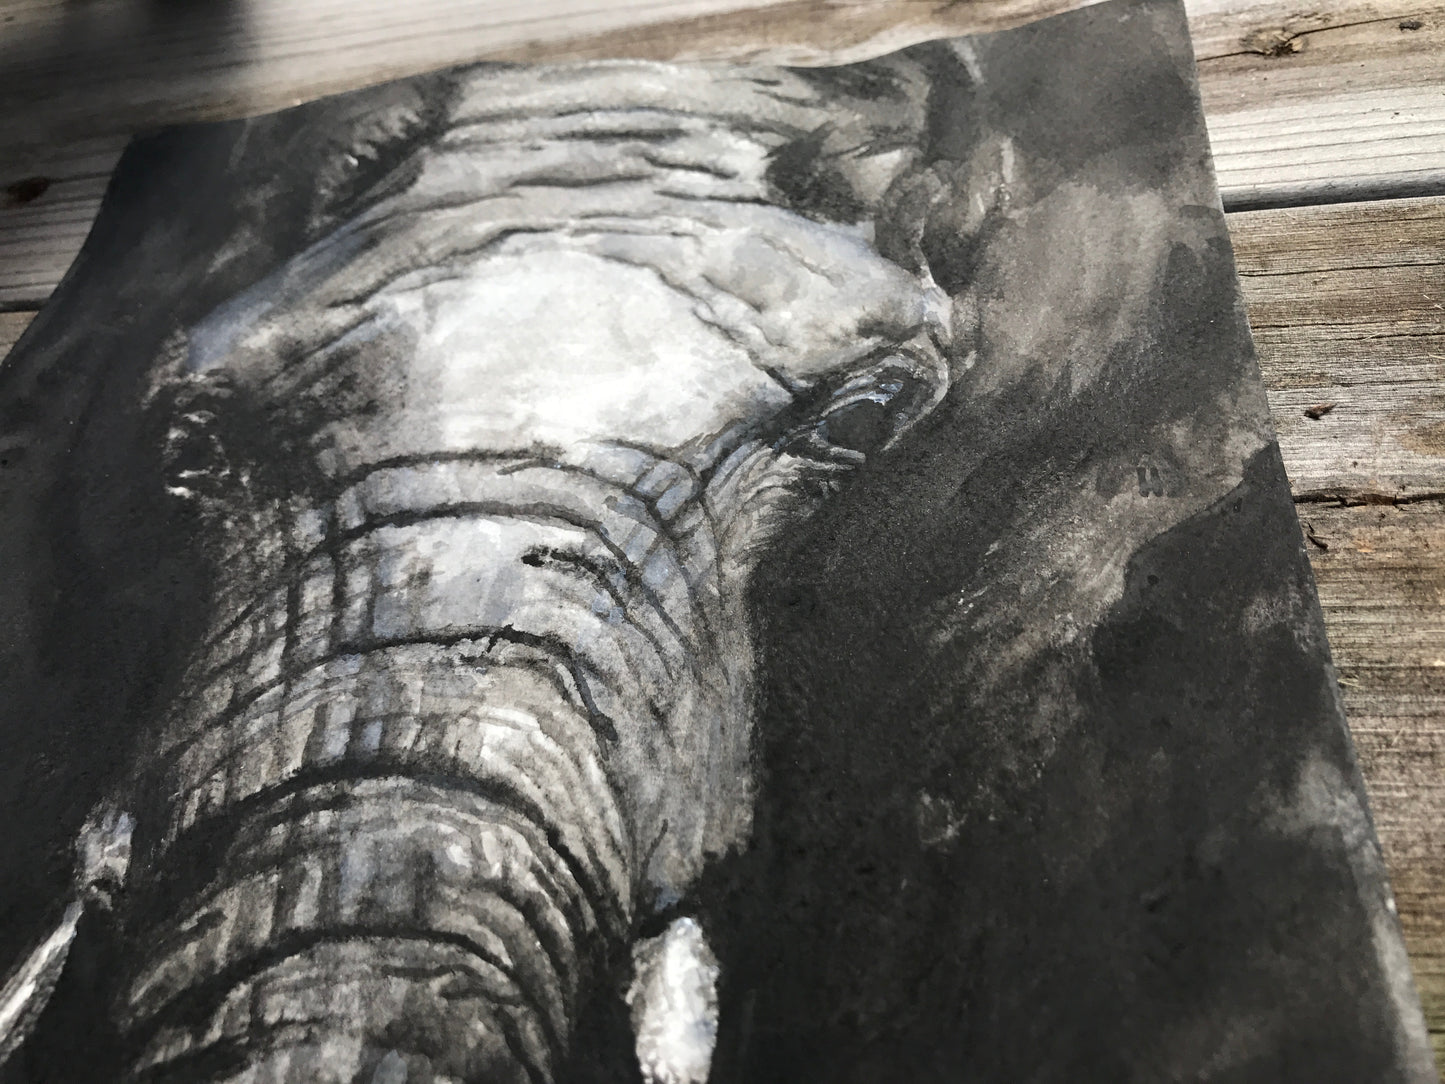 "Out of the Darkness" Elephant, Mixed Media Art Print